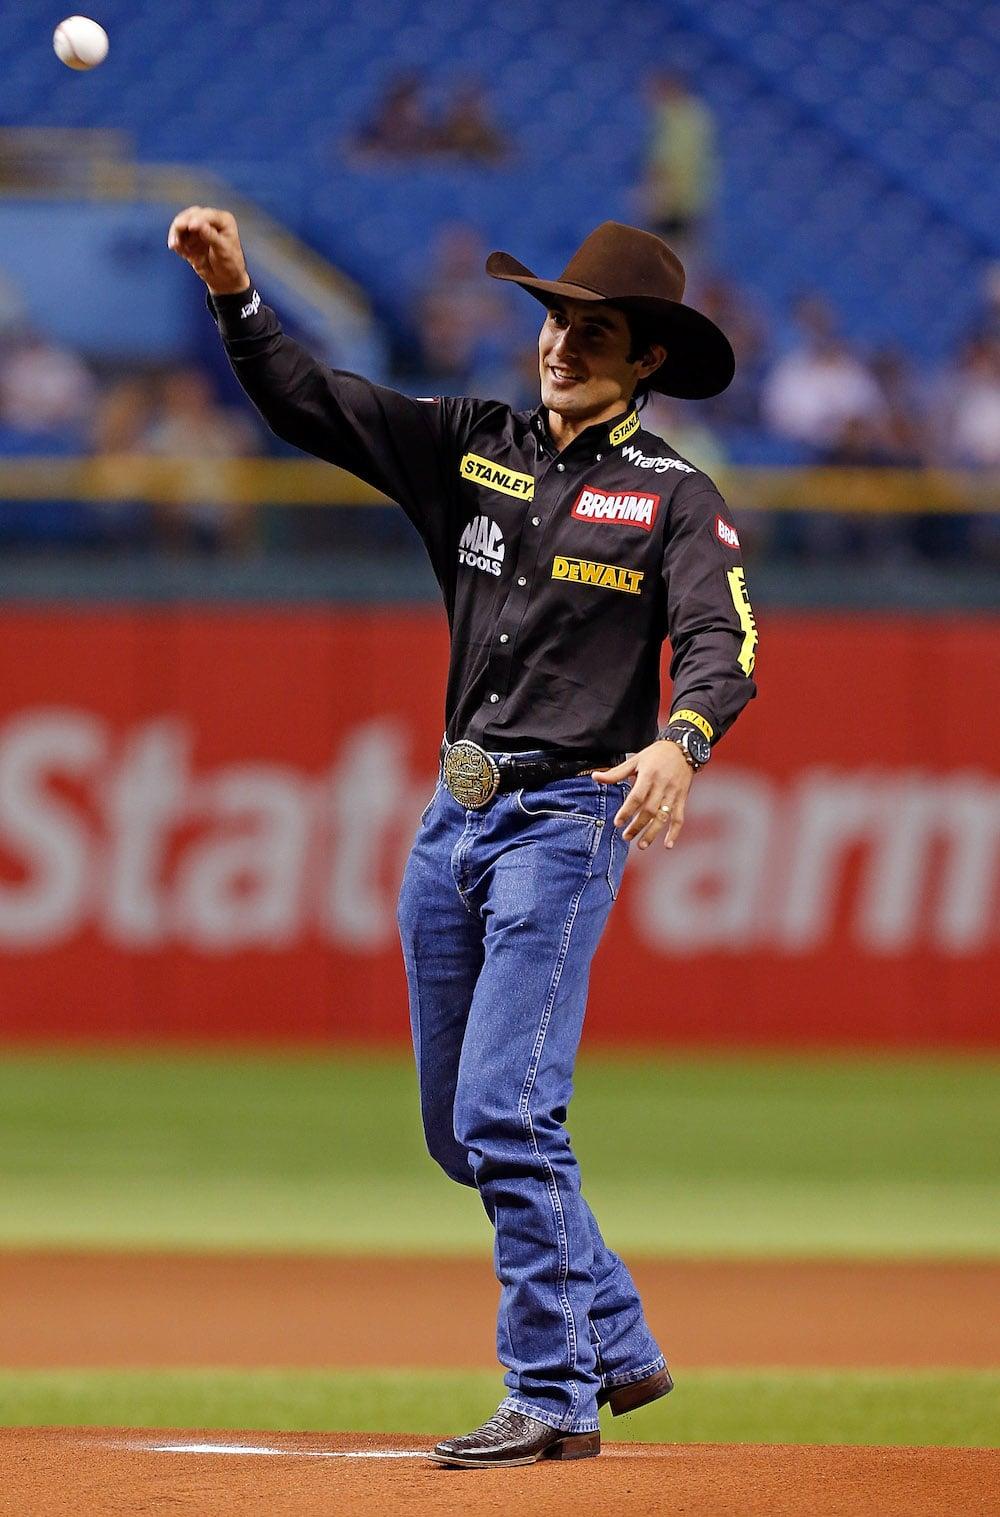 Silvano Alves throws out the ceremonial first pitch in the 2012 Red Sox and Rays game. He is wearing a black cherry felt cowboy hat and his sponsorship shirt.